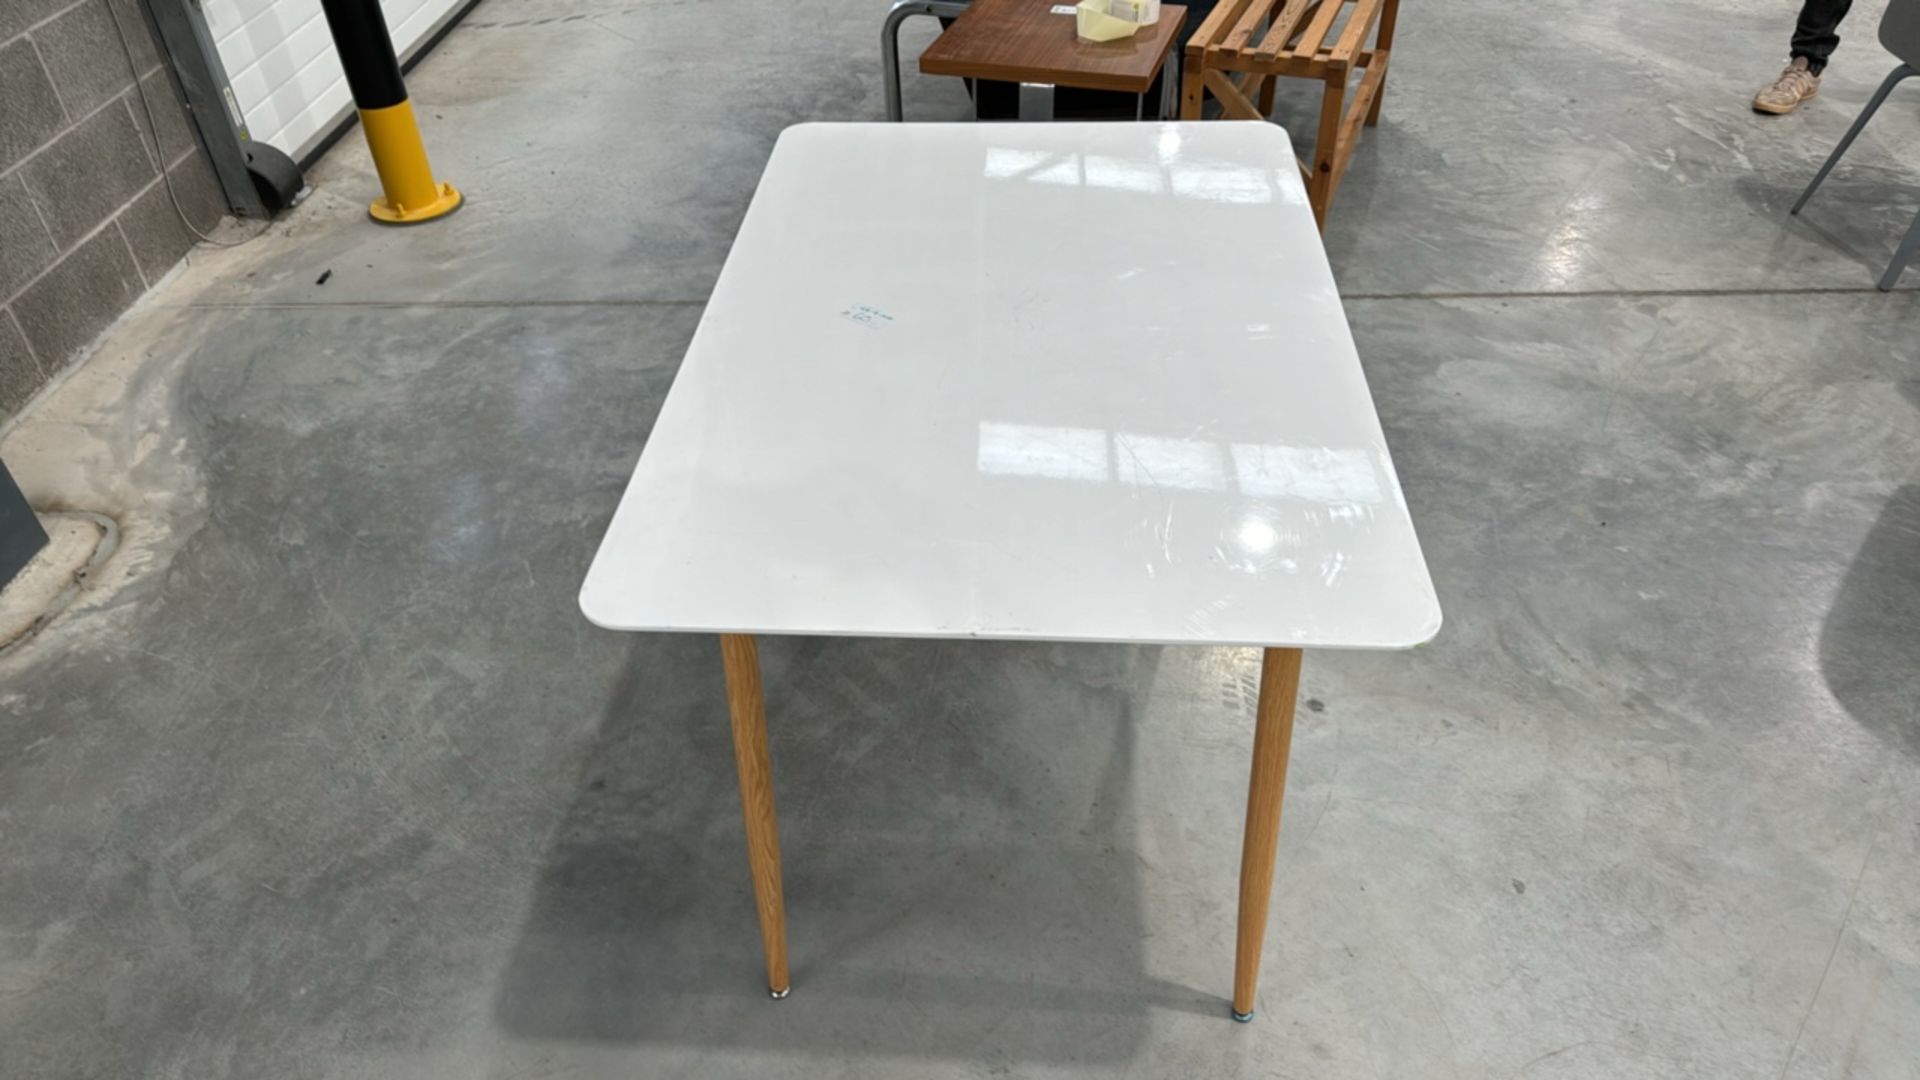 White Gloss Table With Wooden Legs - Image 3 of 4